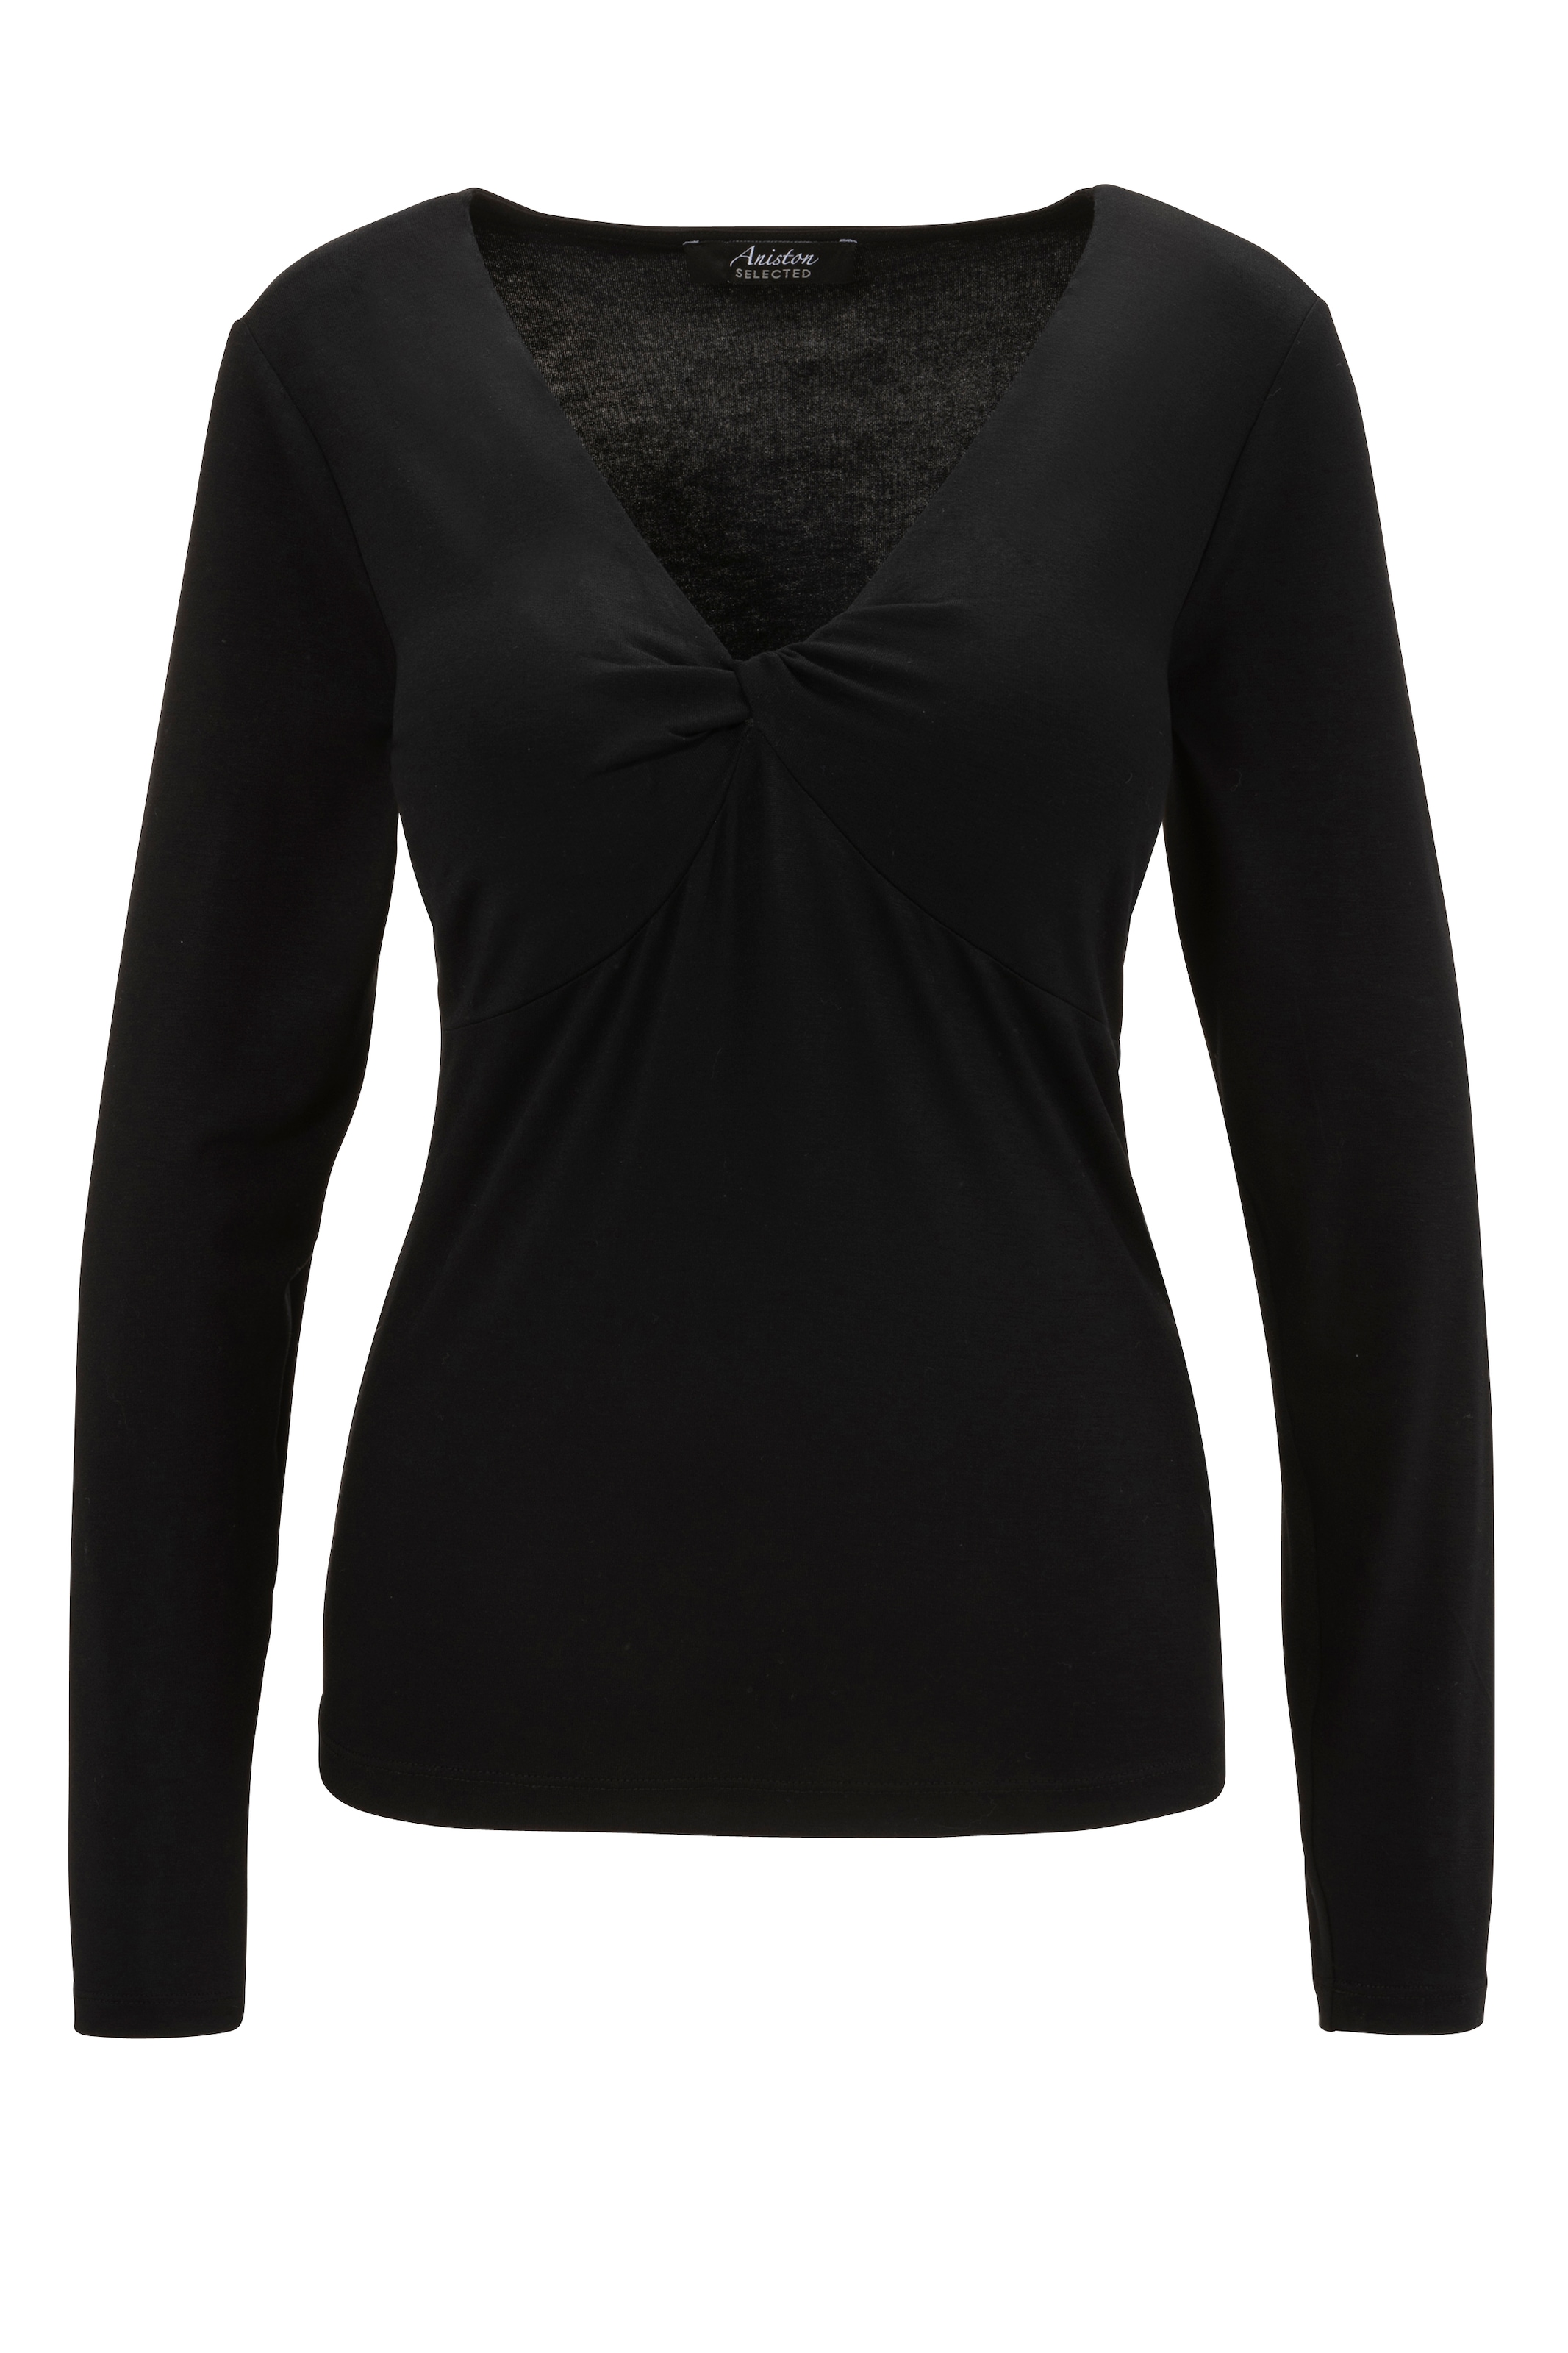 Aniston Basic online Longsleeve, Knotendetail mit SELECTED